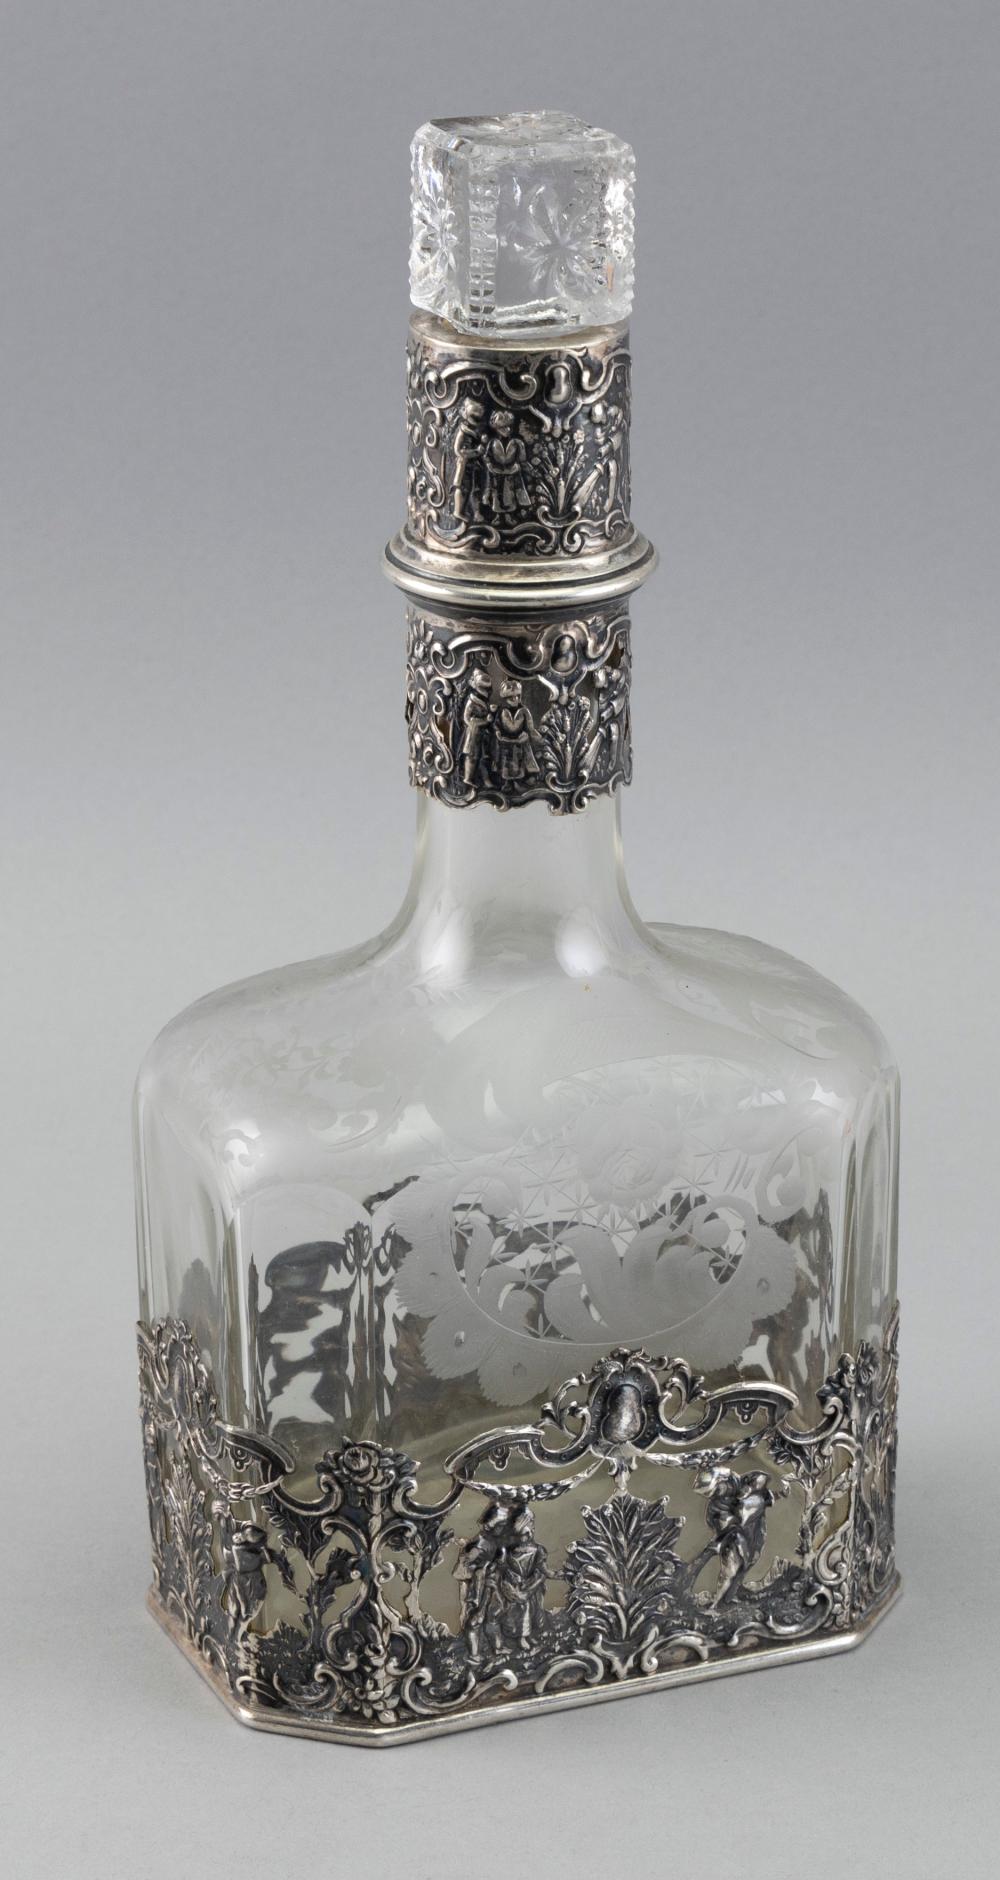 SILVER OVERLAY ETCHED GLASS DECANTER 34fa68